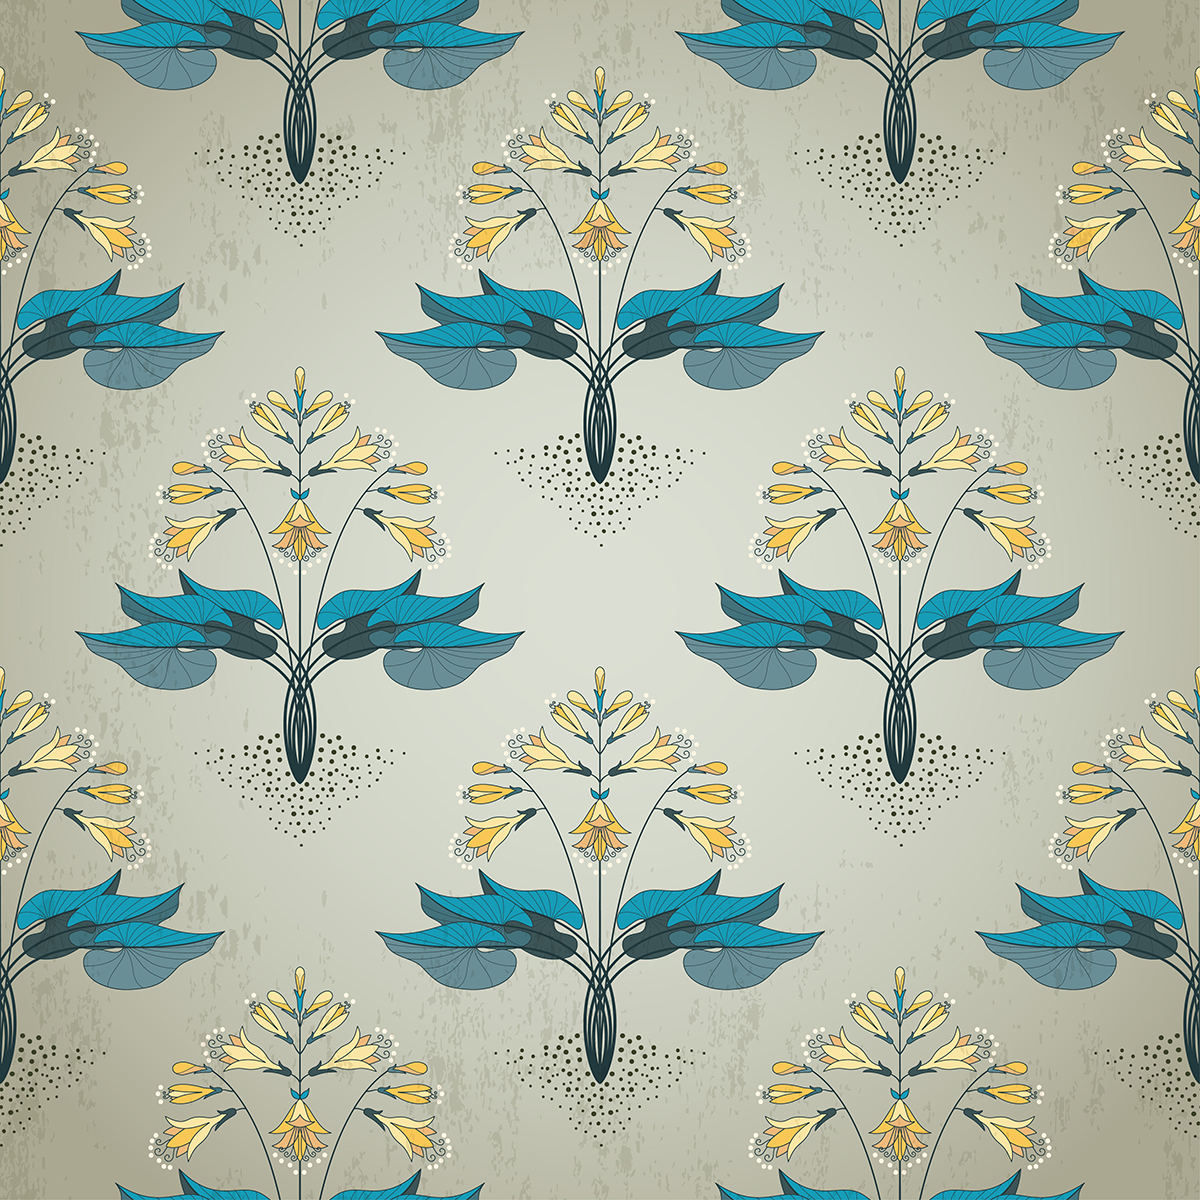 A wallpaper with blue and yellow flowers